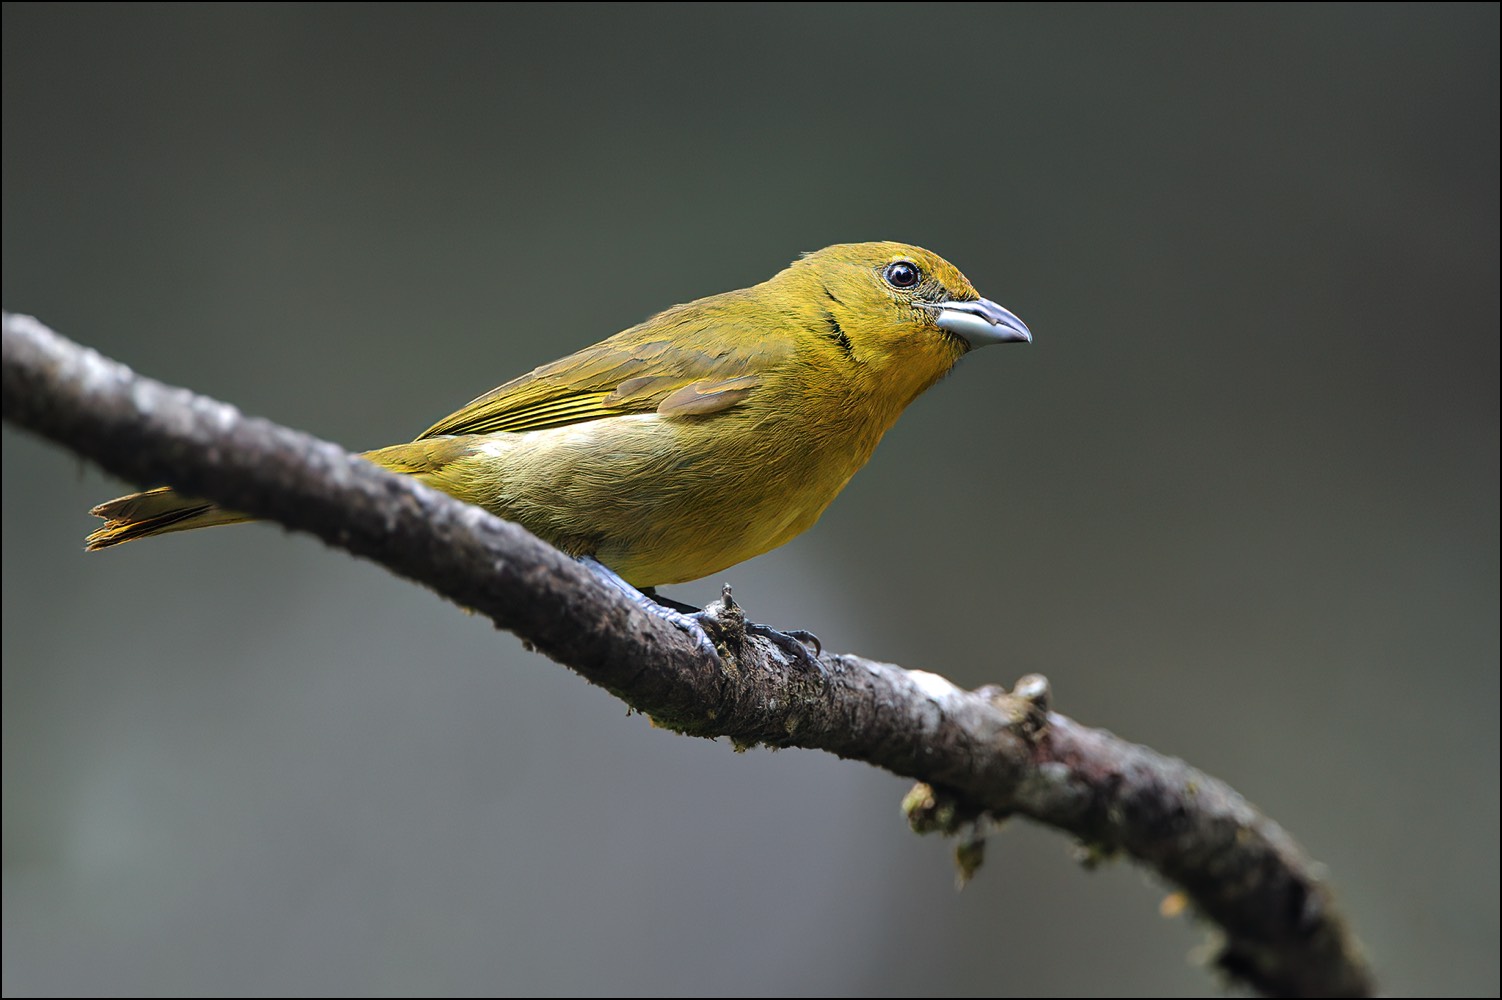 Hepatic Tanager (Levertangare)